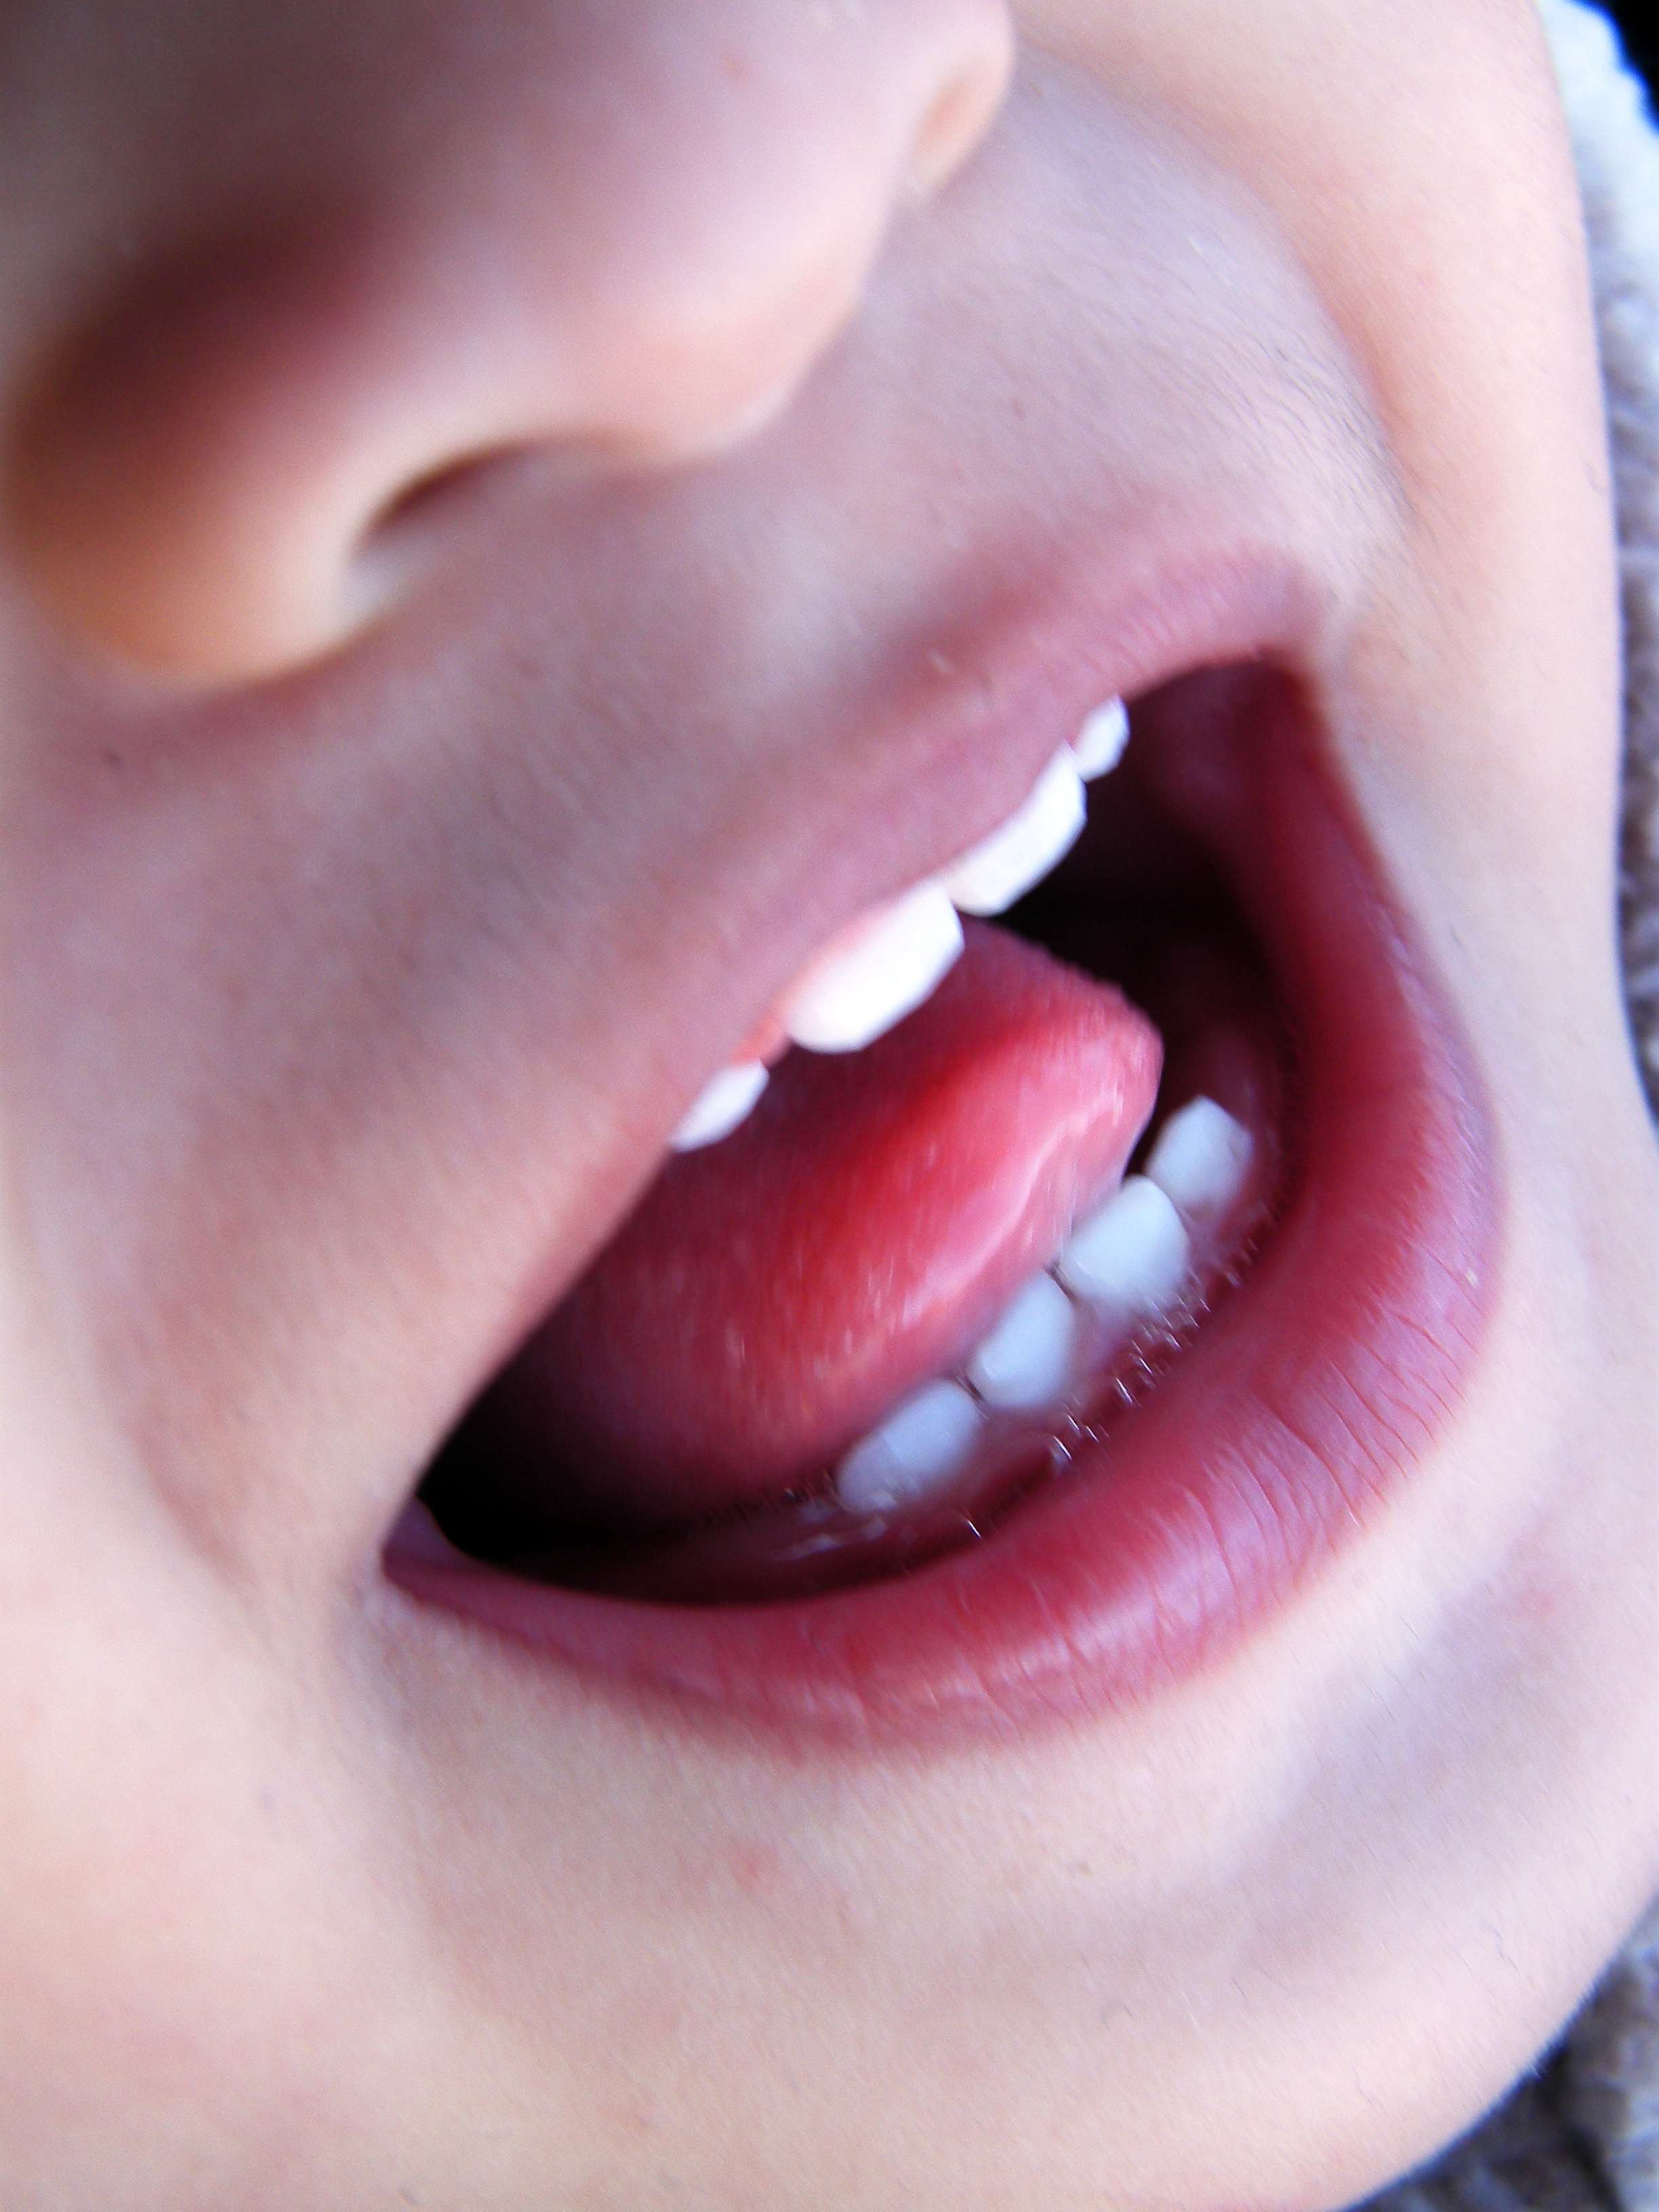 true confession tuesday: I take my kid to the dentist–but I don’t believe in dentistry